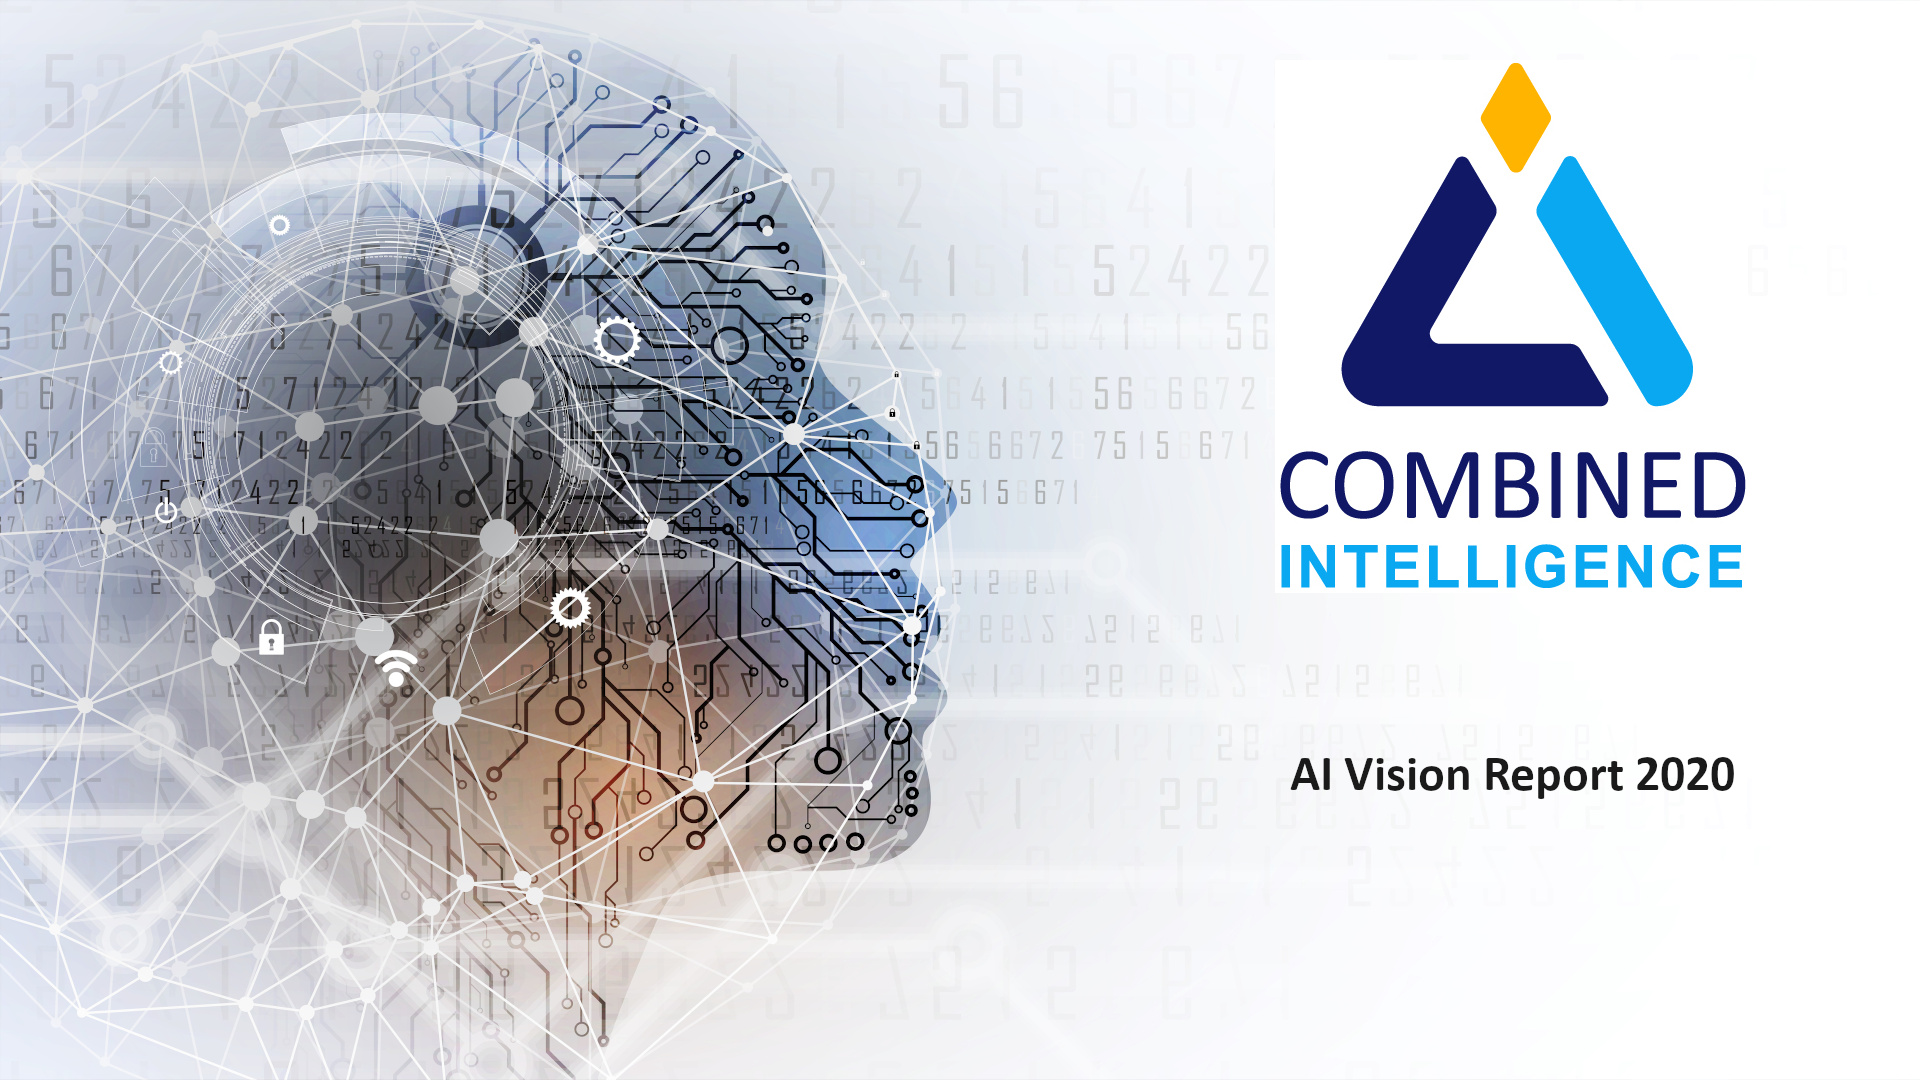 Our AI Vision 2020 Report